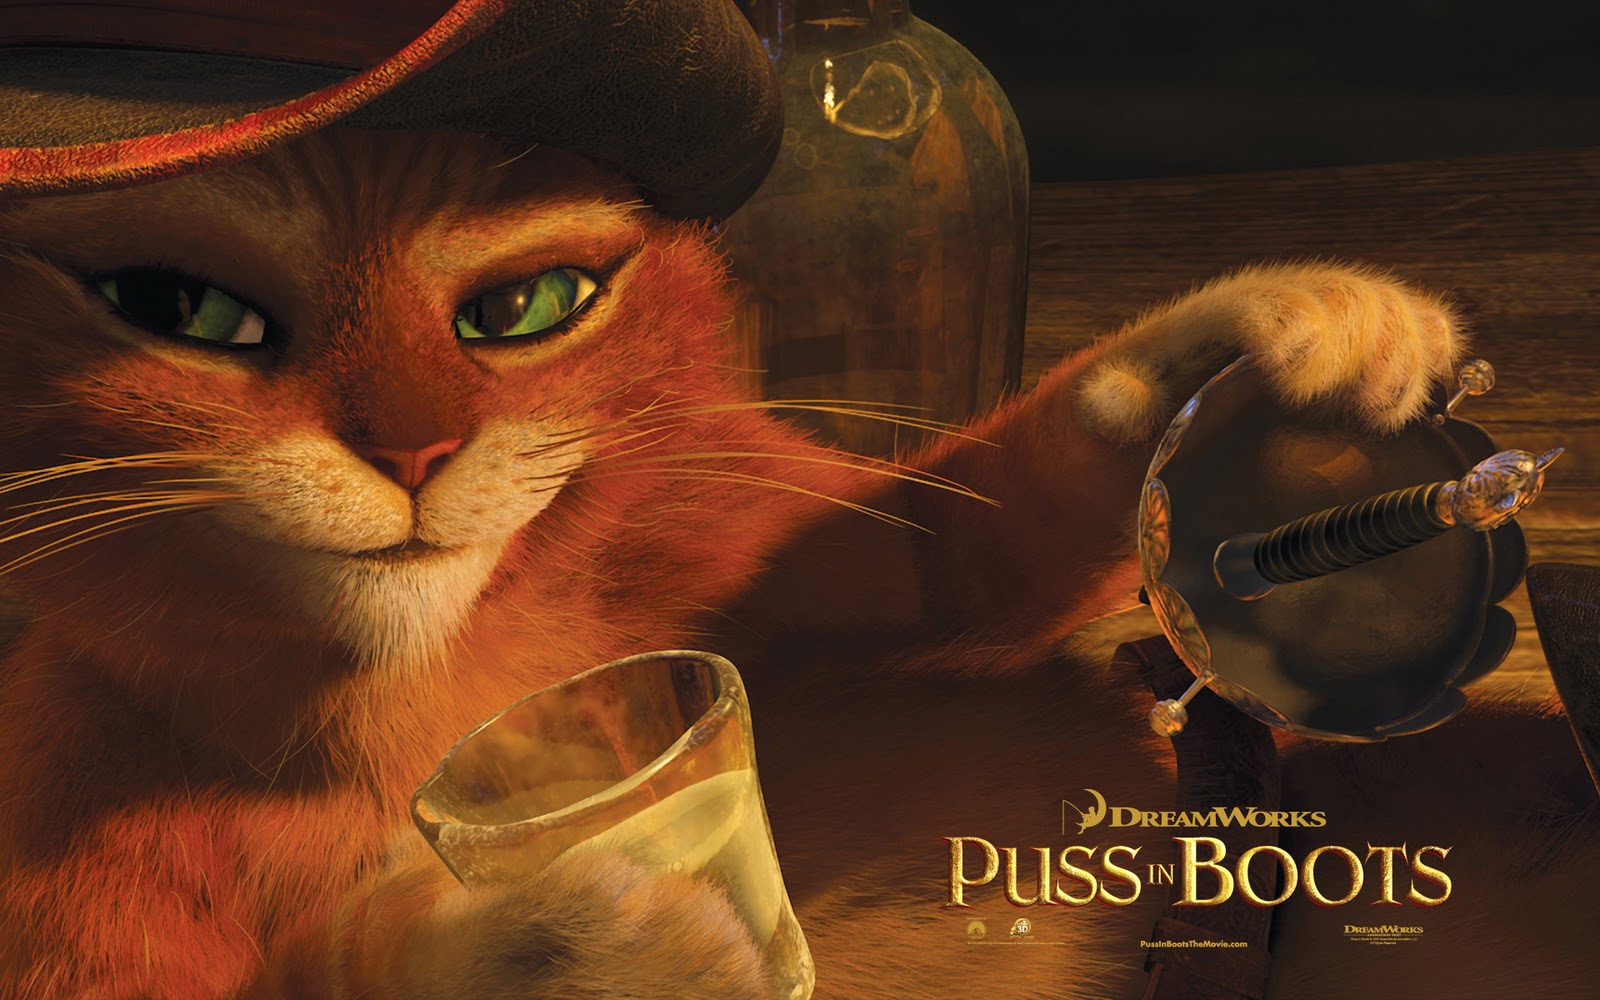 Like the movie? Buy the book. Puss in Boots New trailer for the first